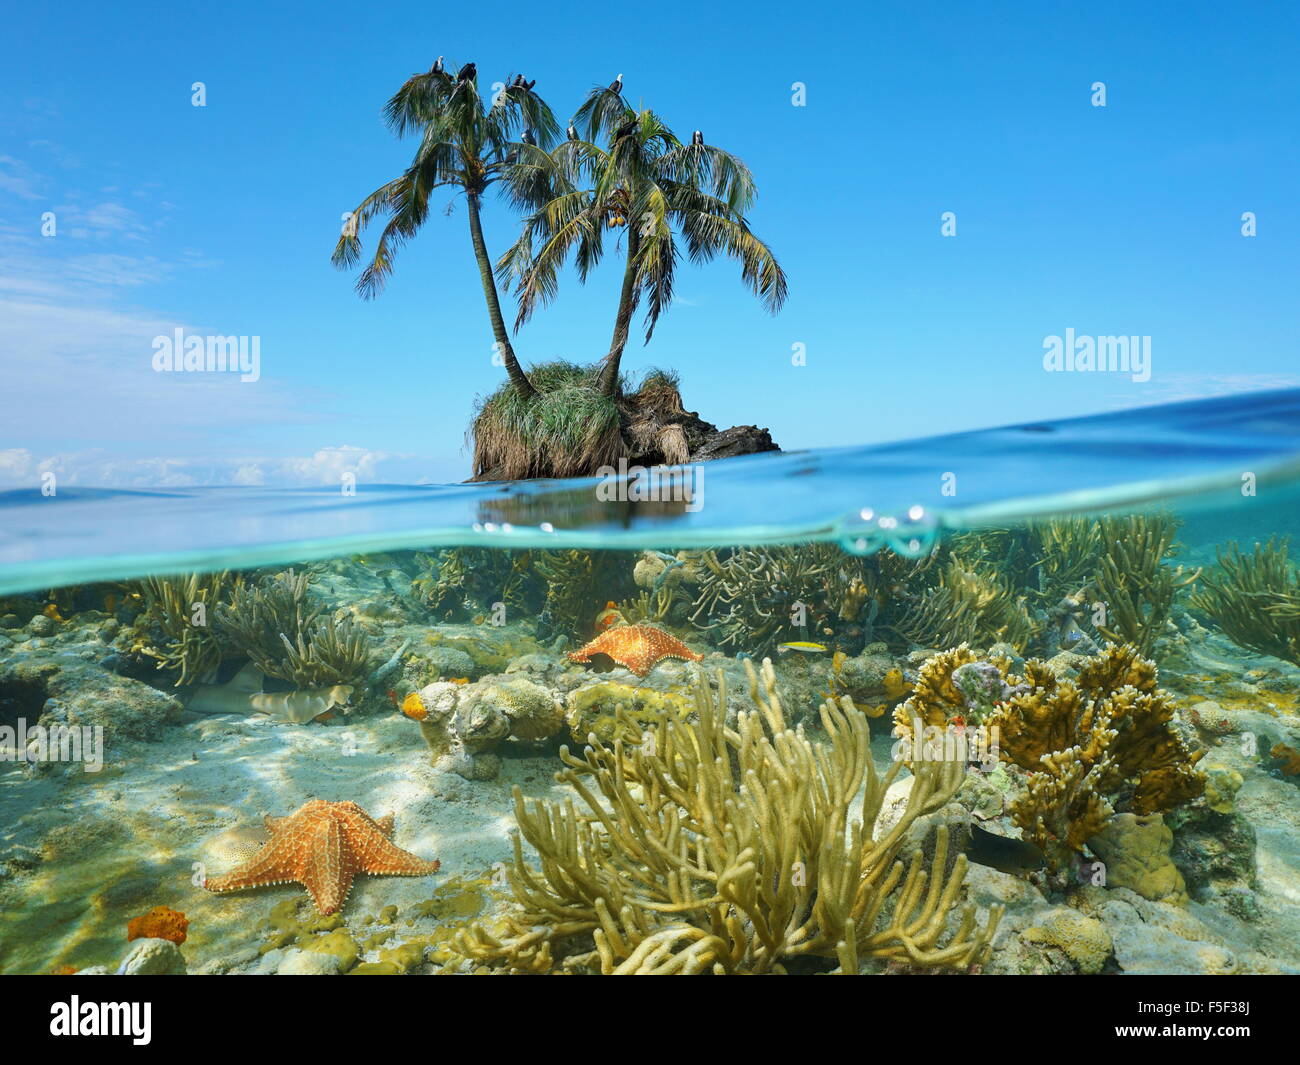 Two coconut trees with sea birds on an islet and split by waterline, corals with starfish underwater, Caribbean sea Stock Photo